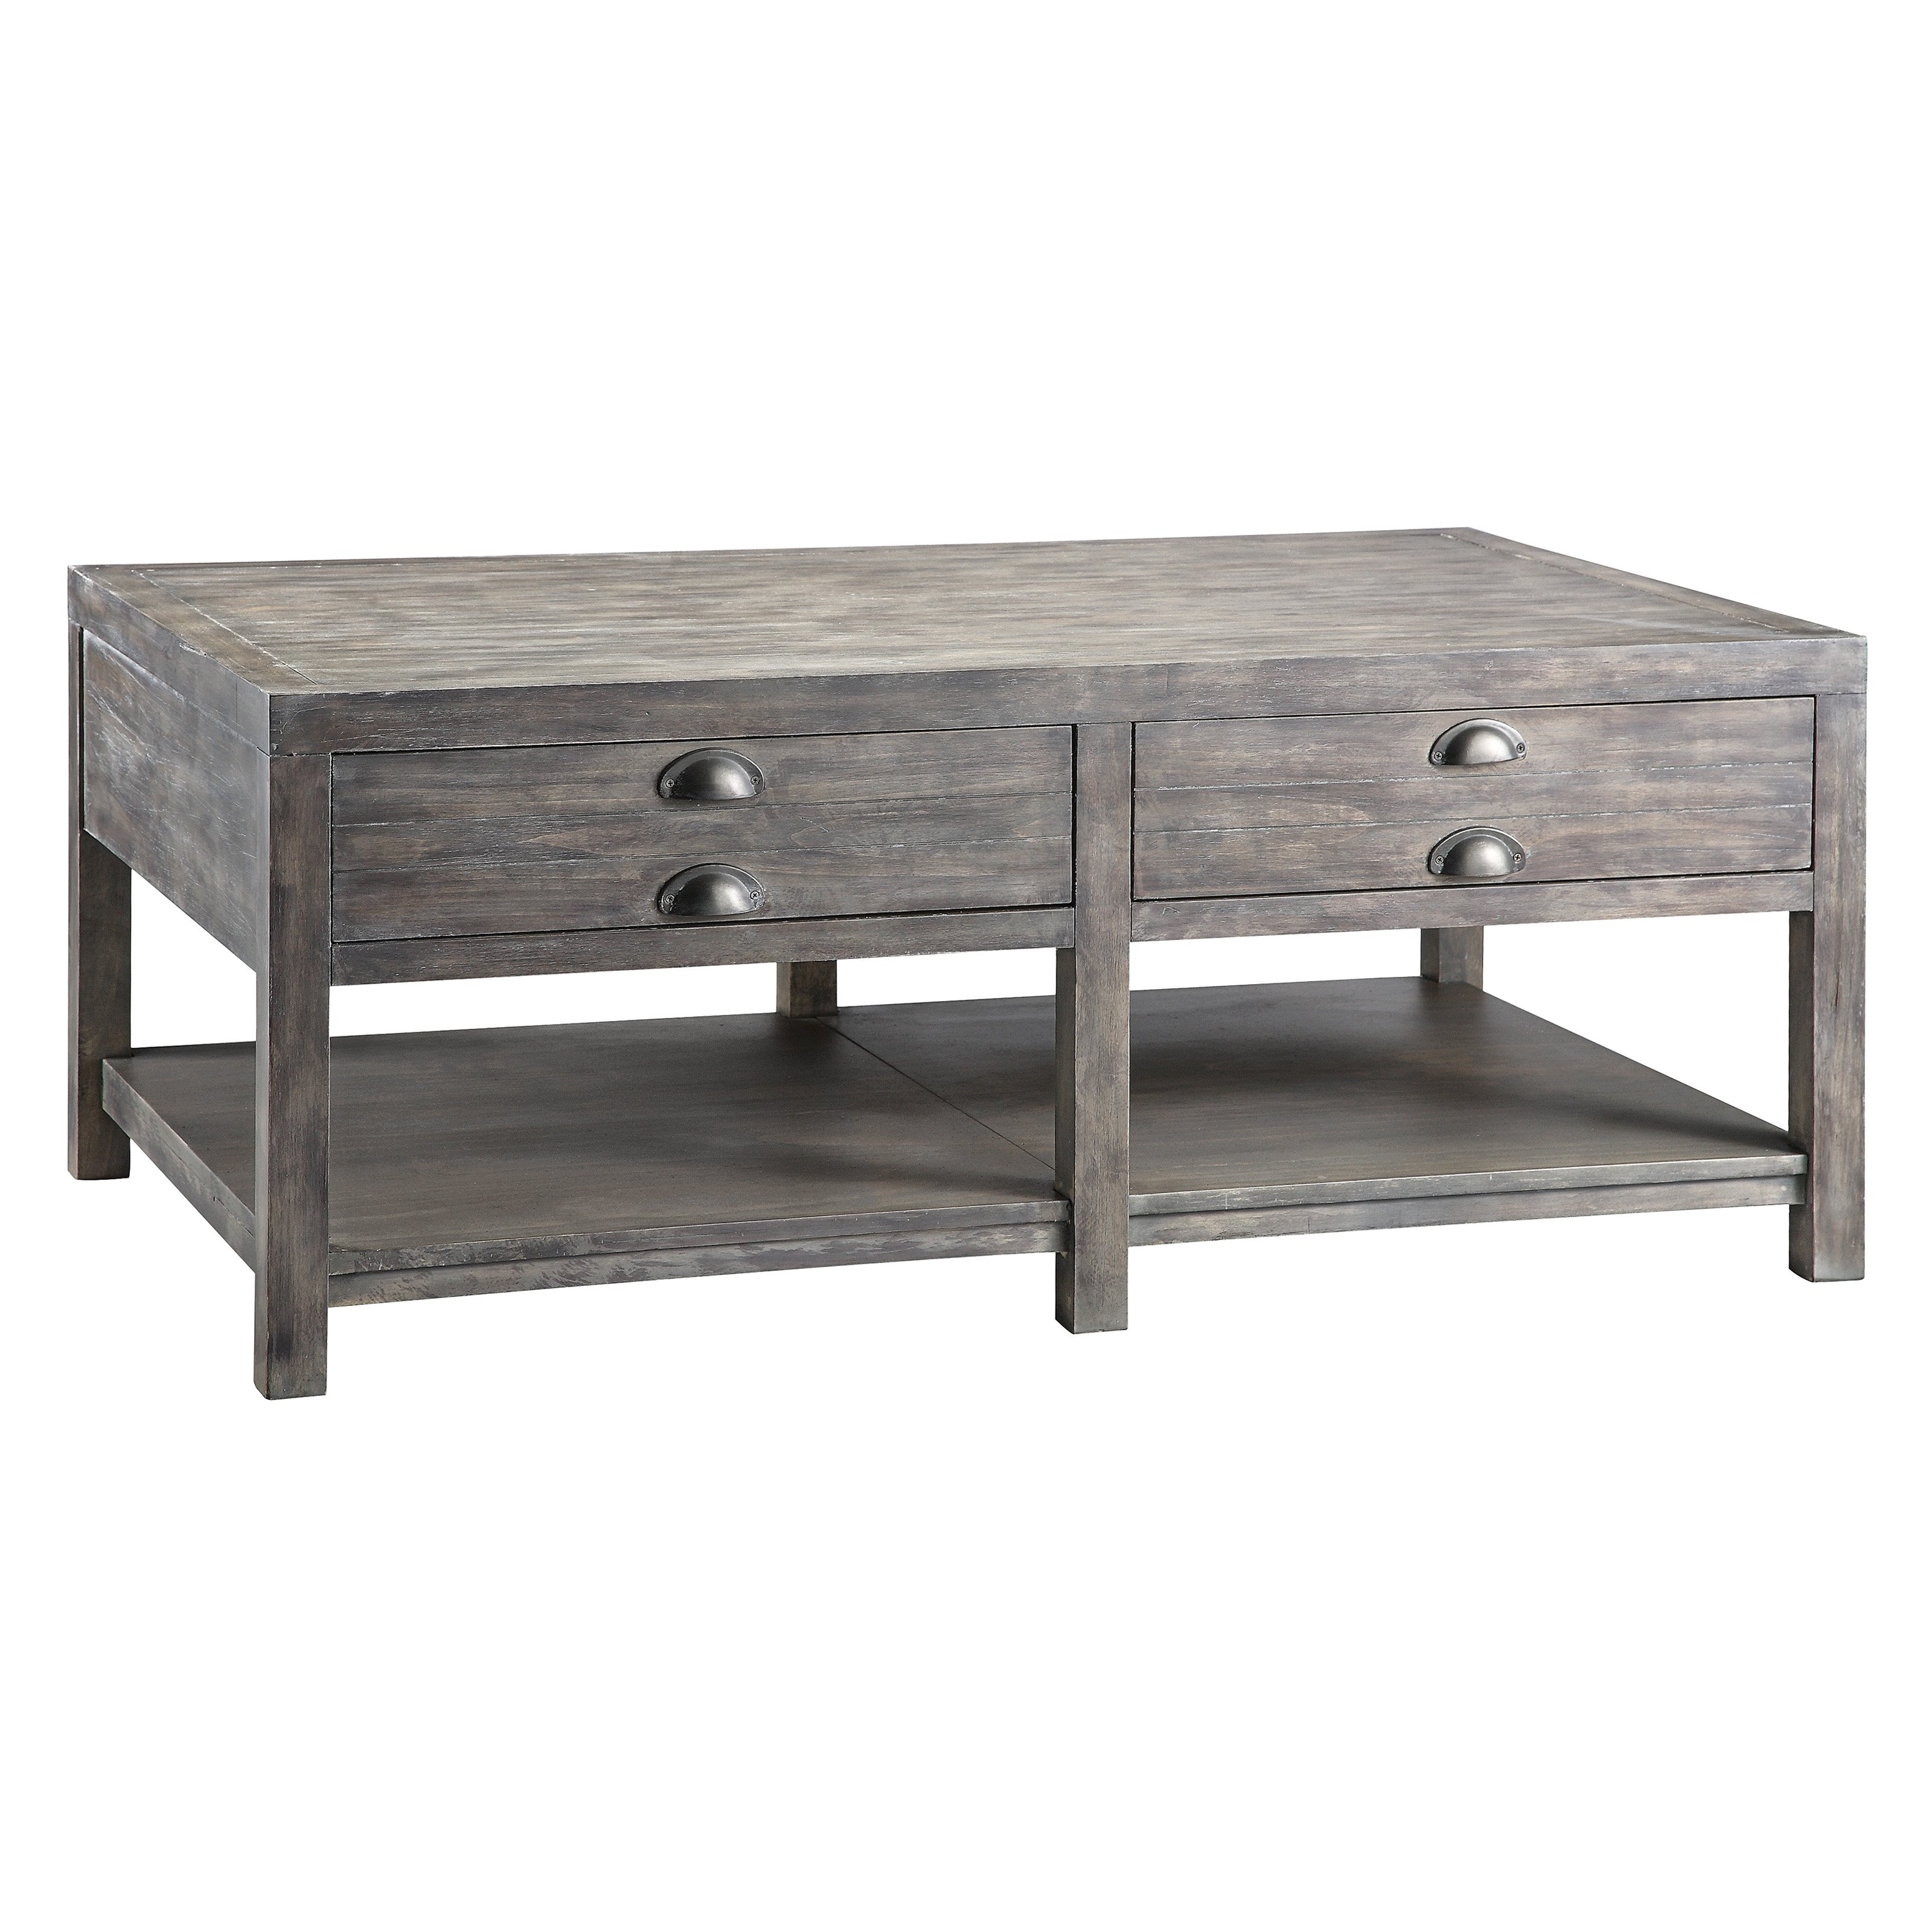 Stein World Bridgeport Rectangular Coffee Table Hayneedle intended for sizing 3200 X 3200